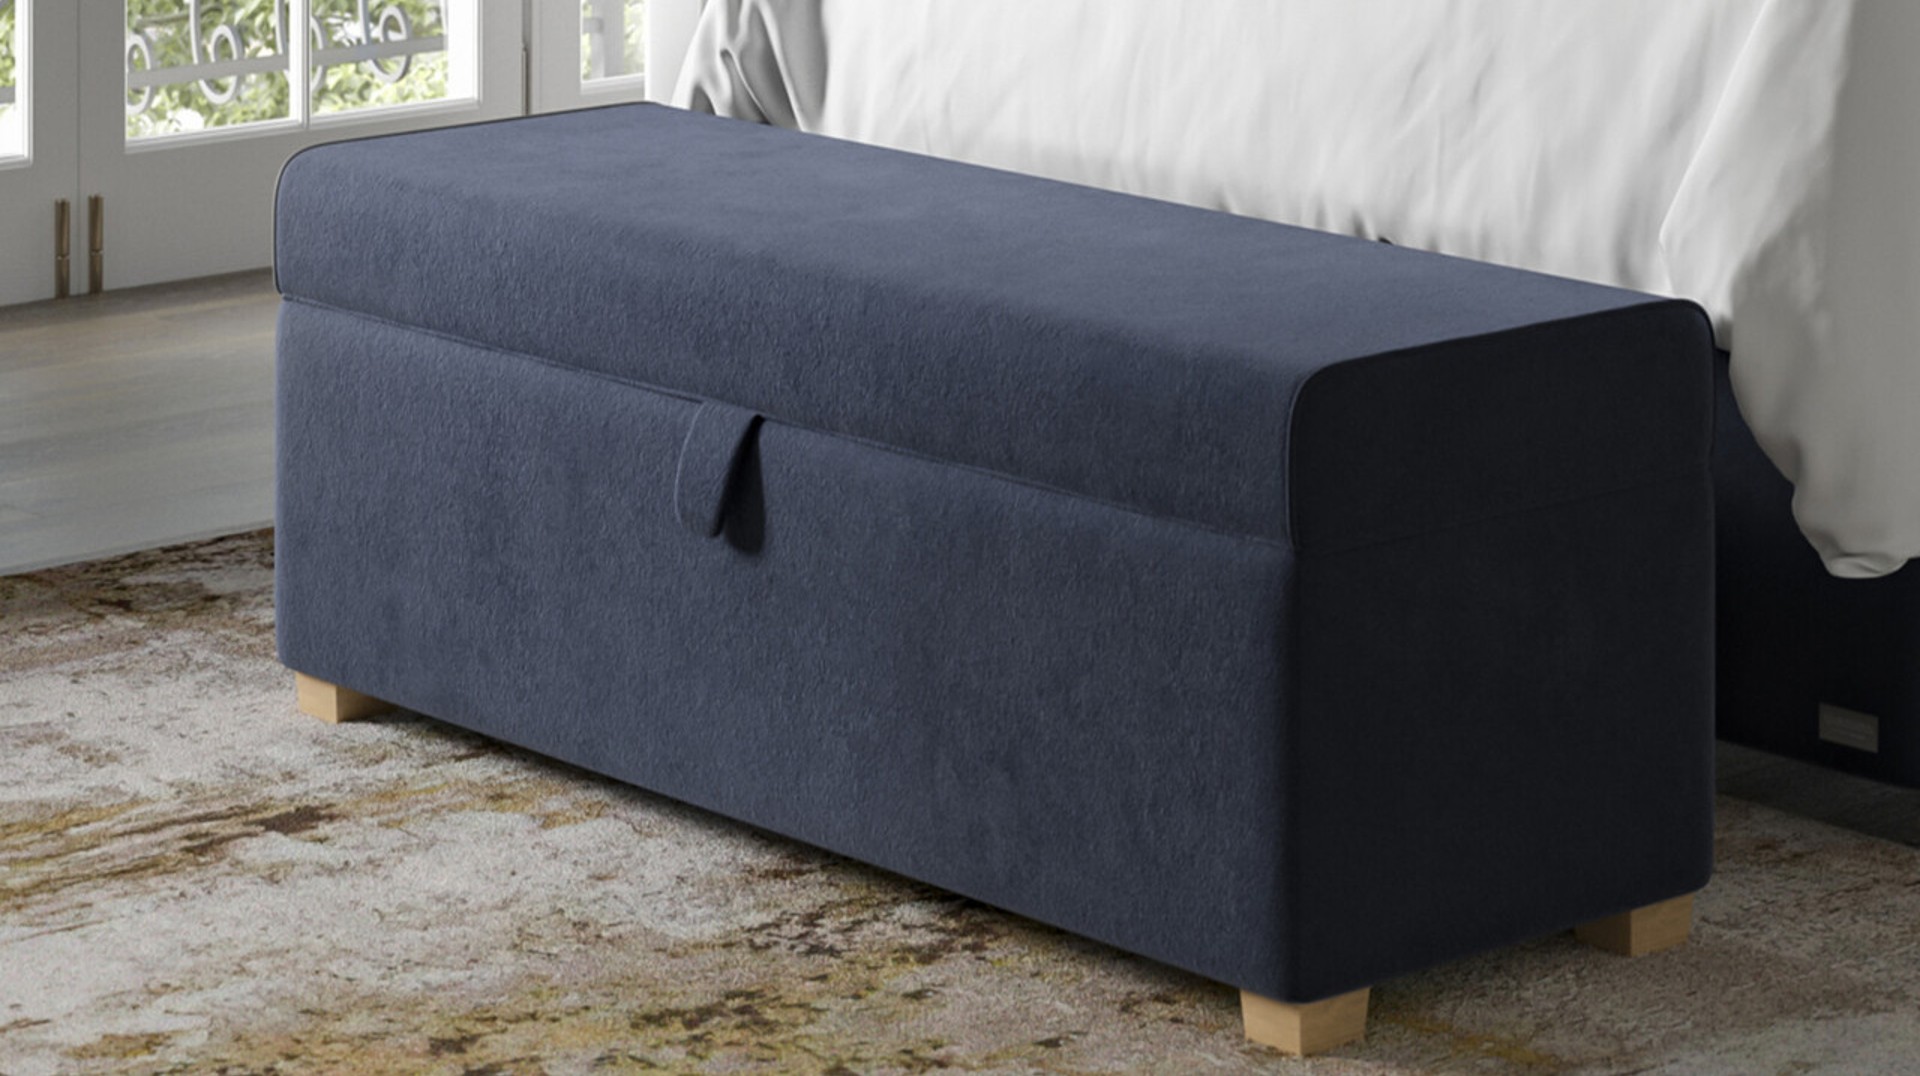 Staples and Co Regent Bedding Box come ottoman come somewhere to sit